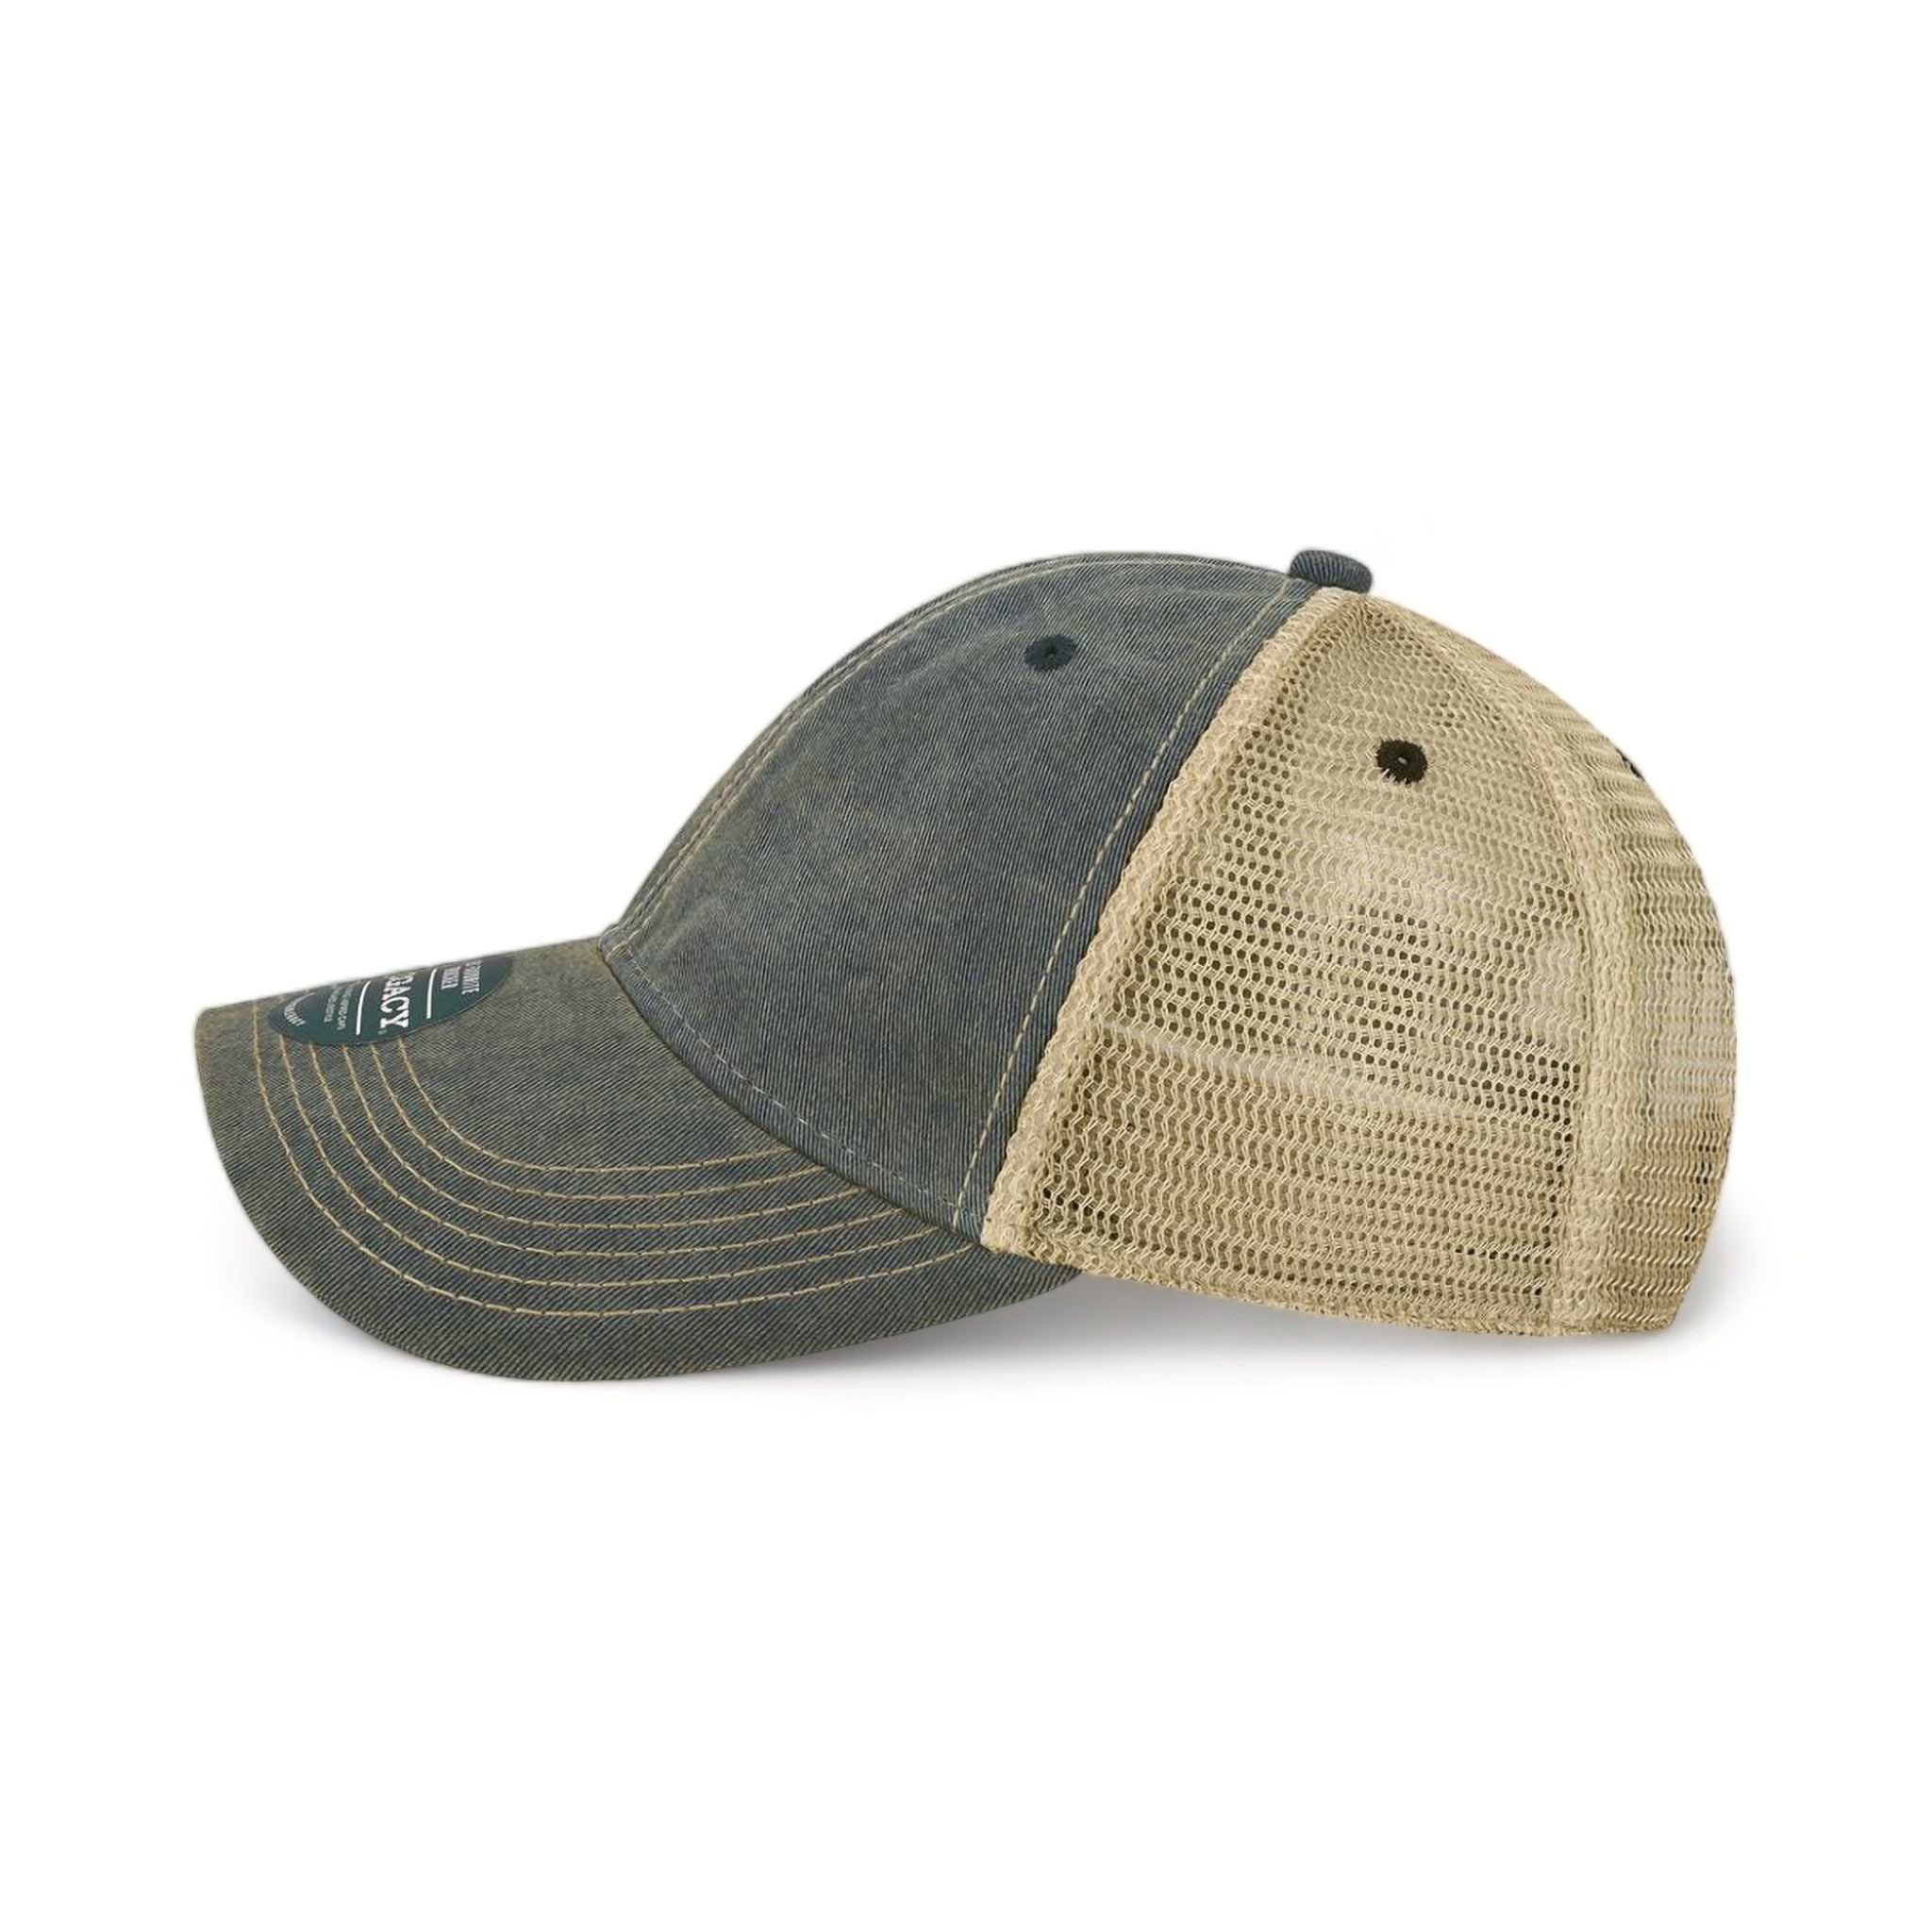 Side view of LEGACY OFA custom hat in navy and khaki